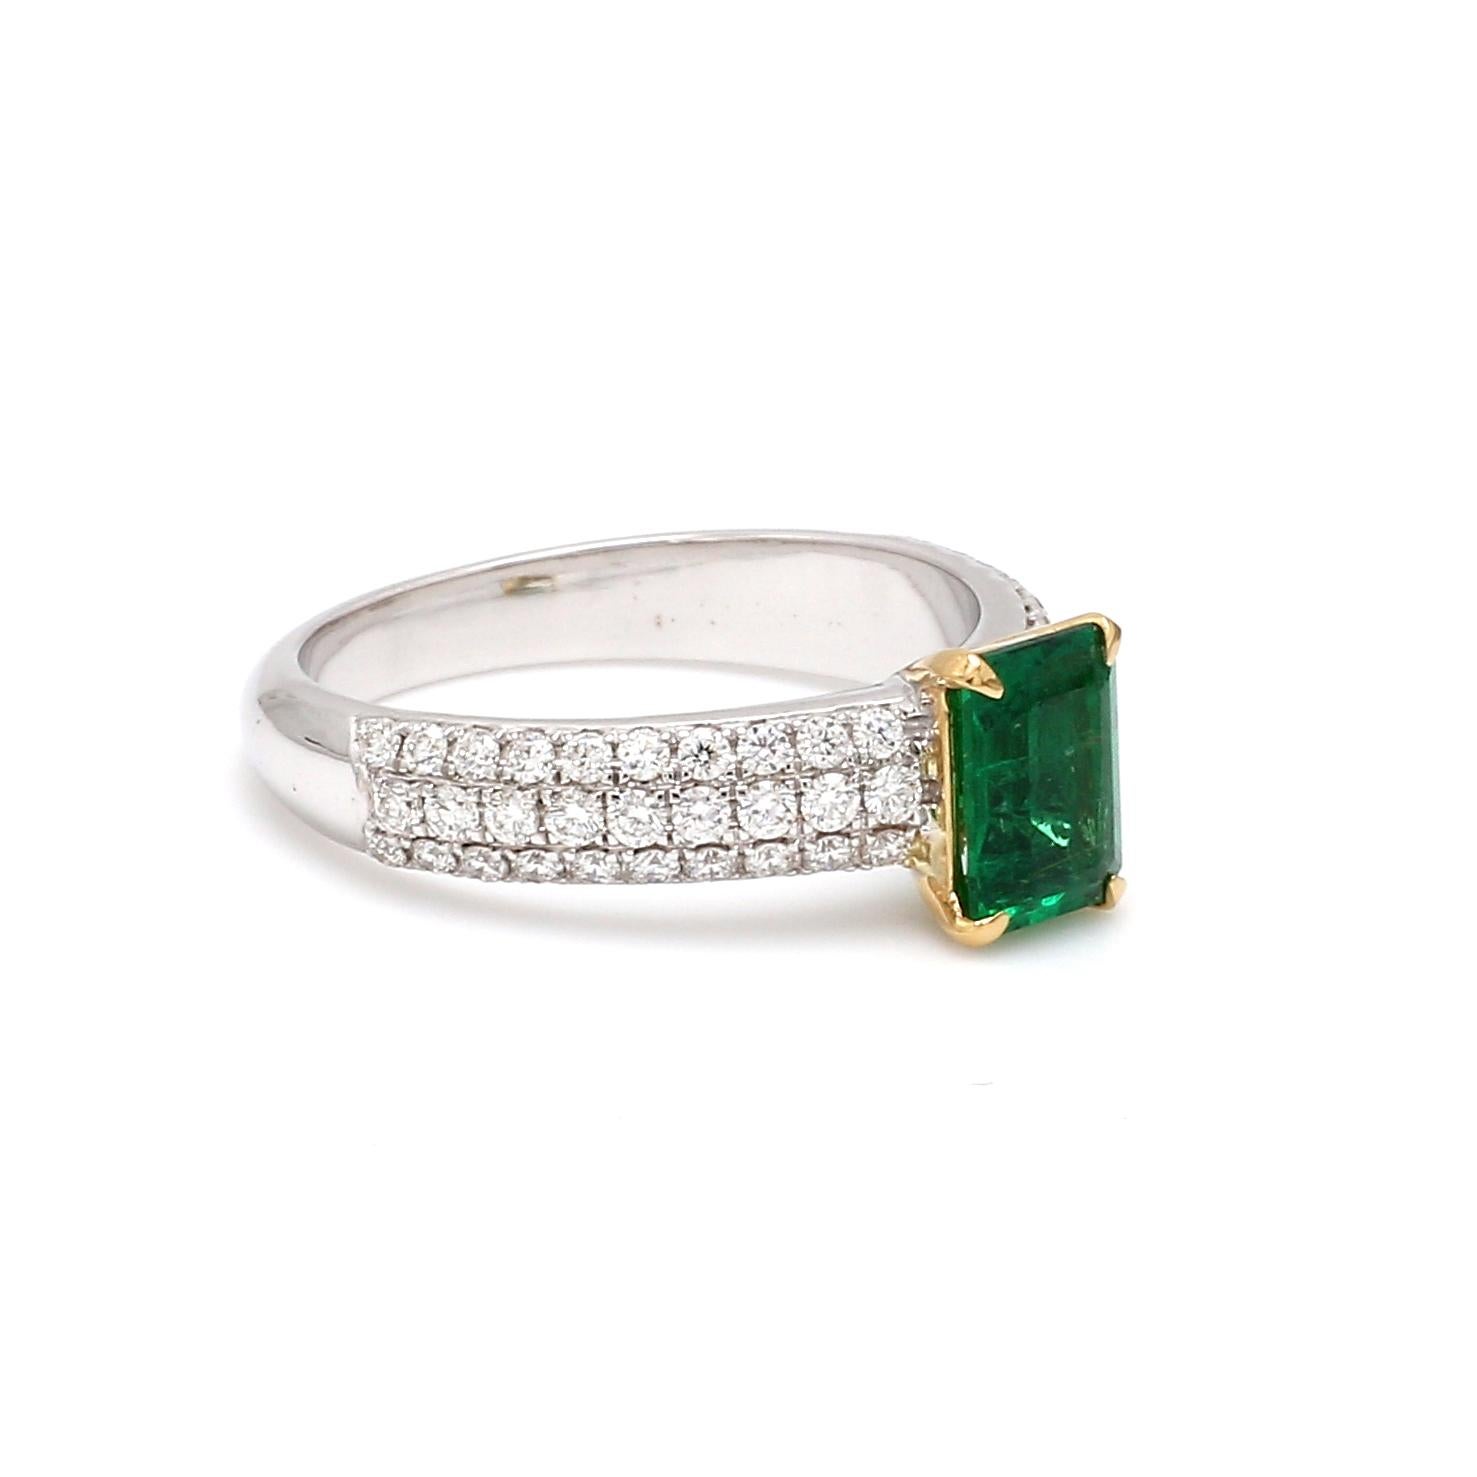 A Beautiful Handcrafted Ring in 18 Karat White Gold with Natural Emerald Cut Emerald Center and Diamonds on Shank. A perfect Ring for occasion

Natural Center Emerald Details
Pieces : 1 Pieces Emerald Cut 
Weight : 0.84 Carat 
AAA Quality